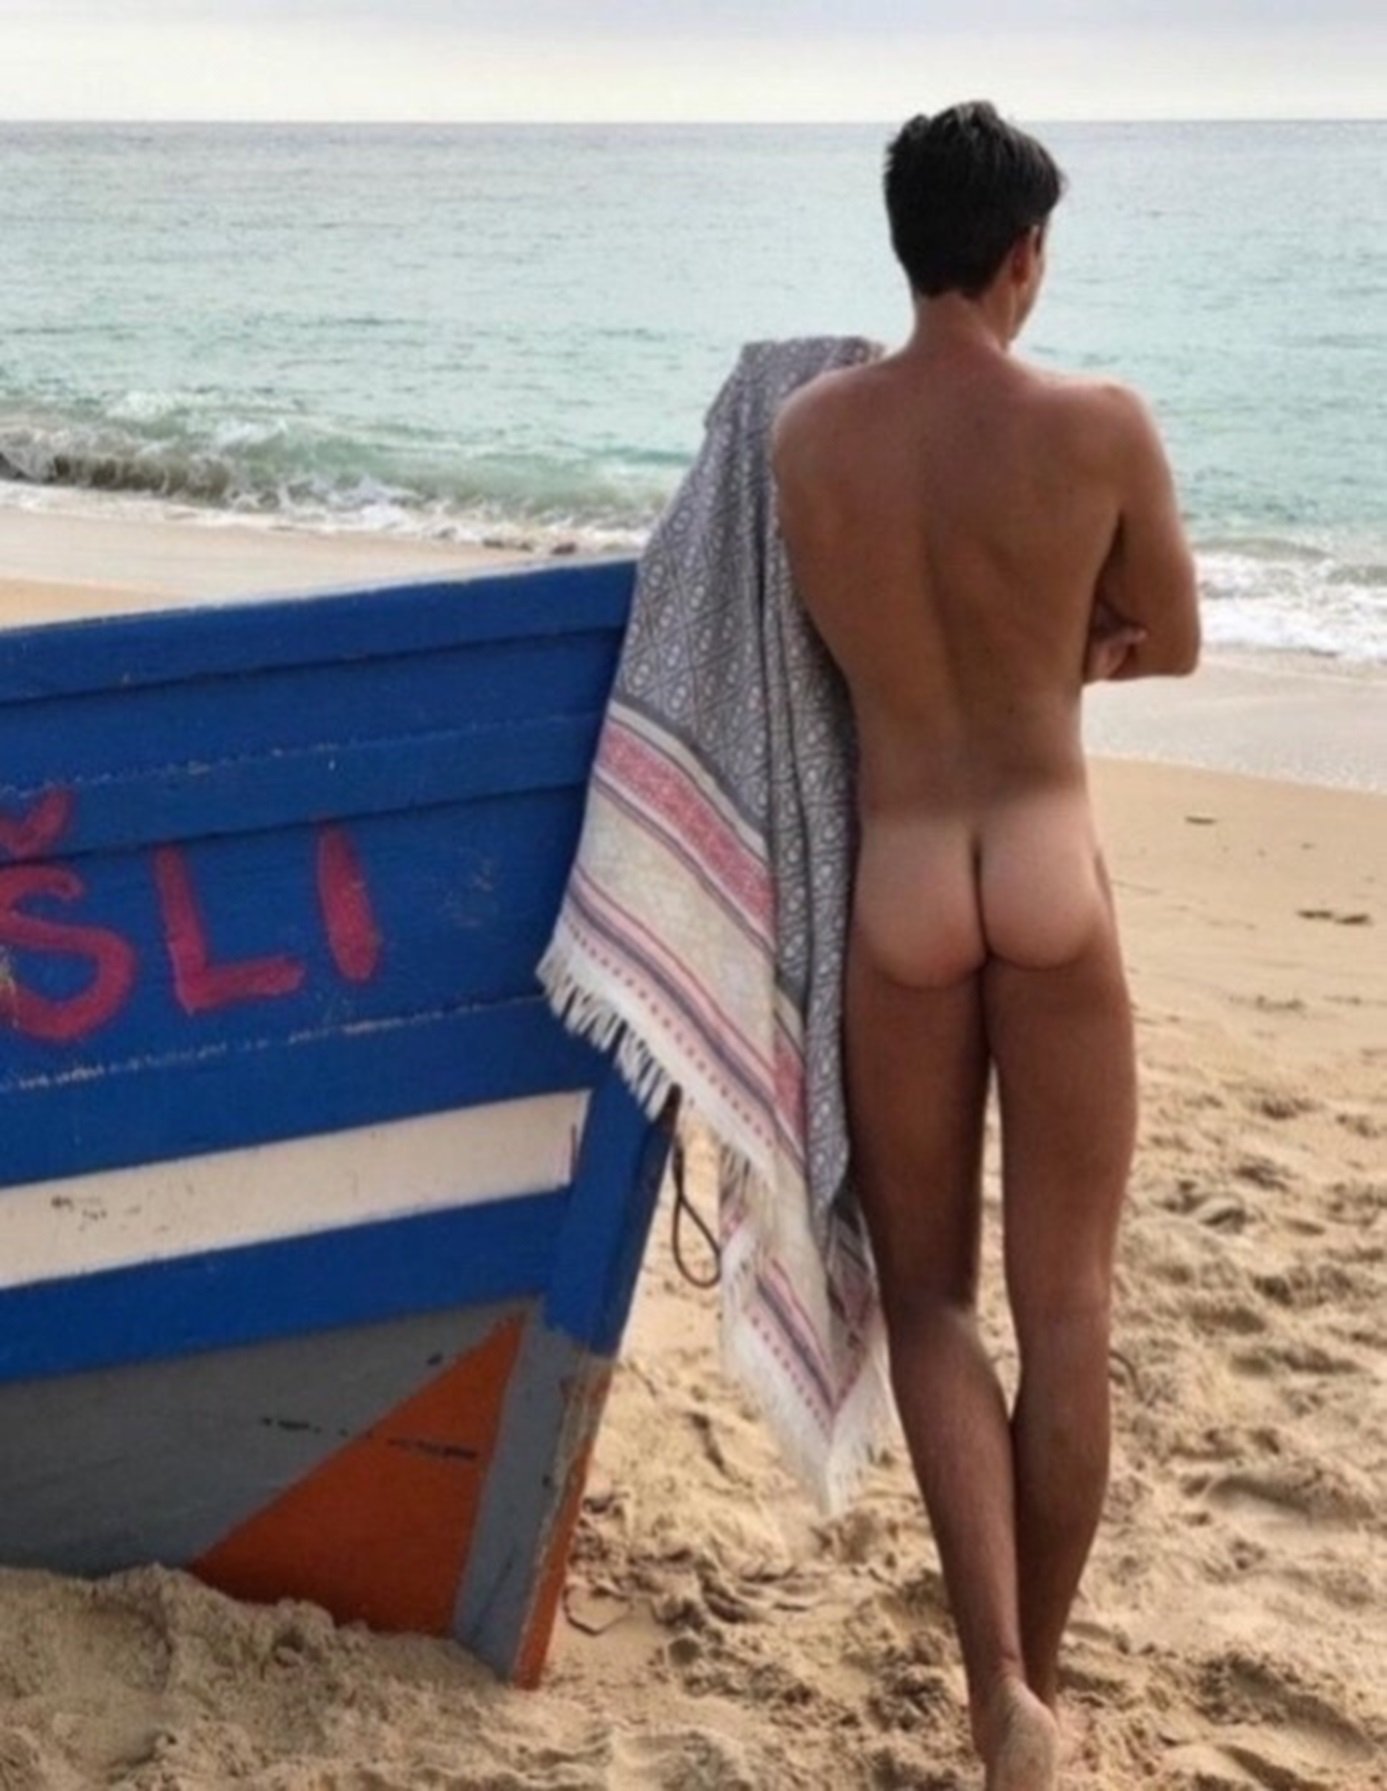 Suns Out, Buns Out twink gay porn - 193119327.jpg